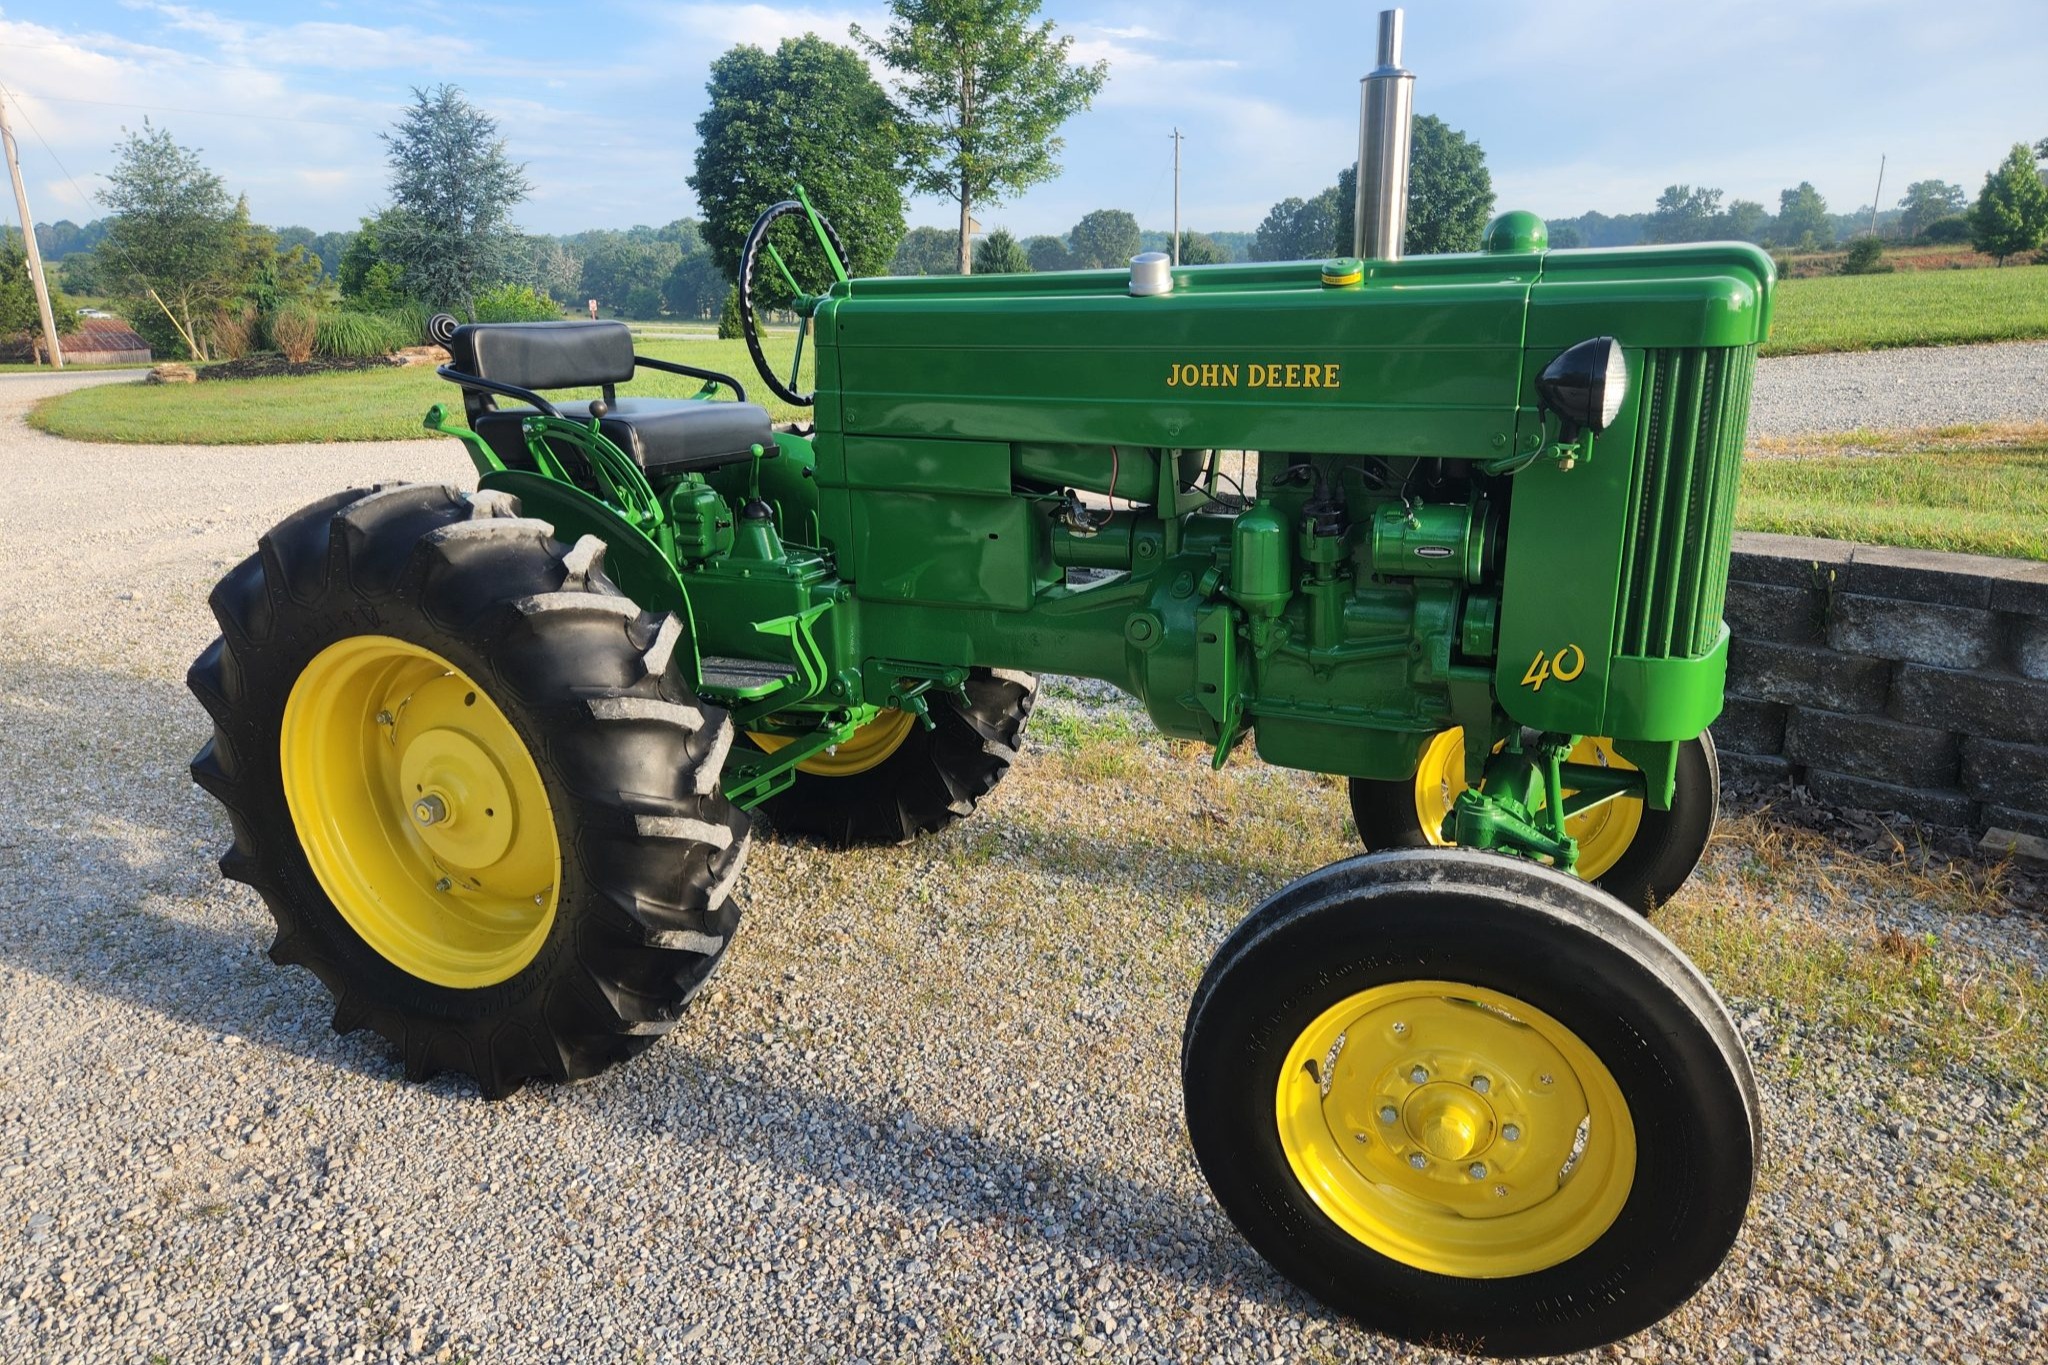 Used 1953 John Deere 40-S Tractor Review